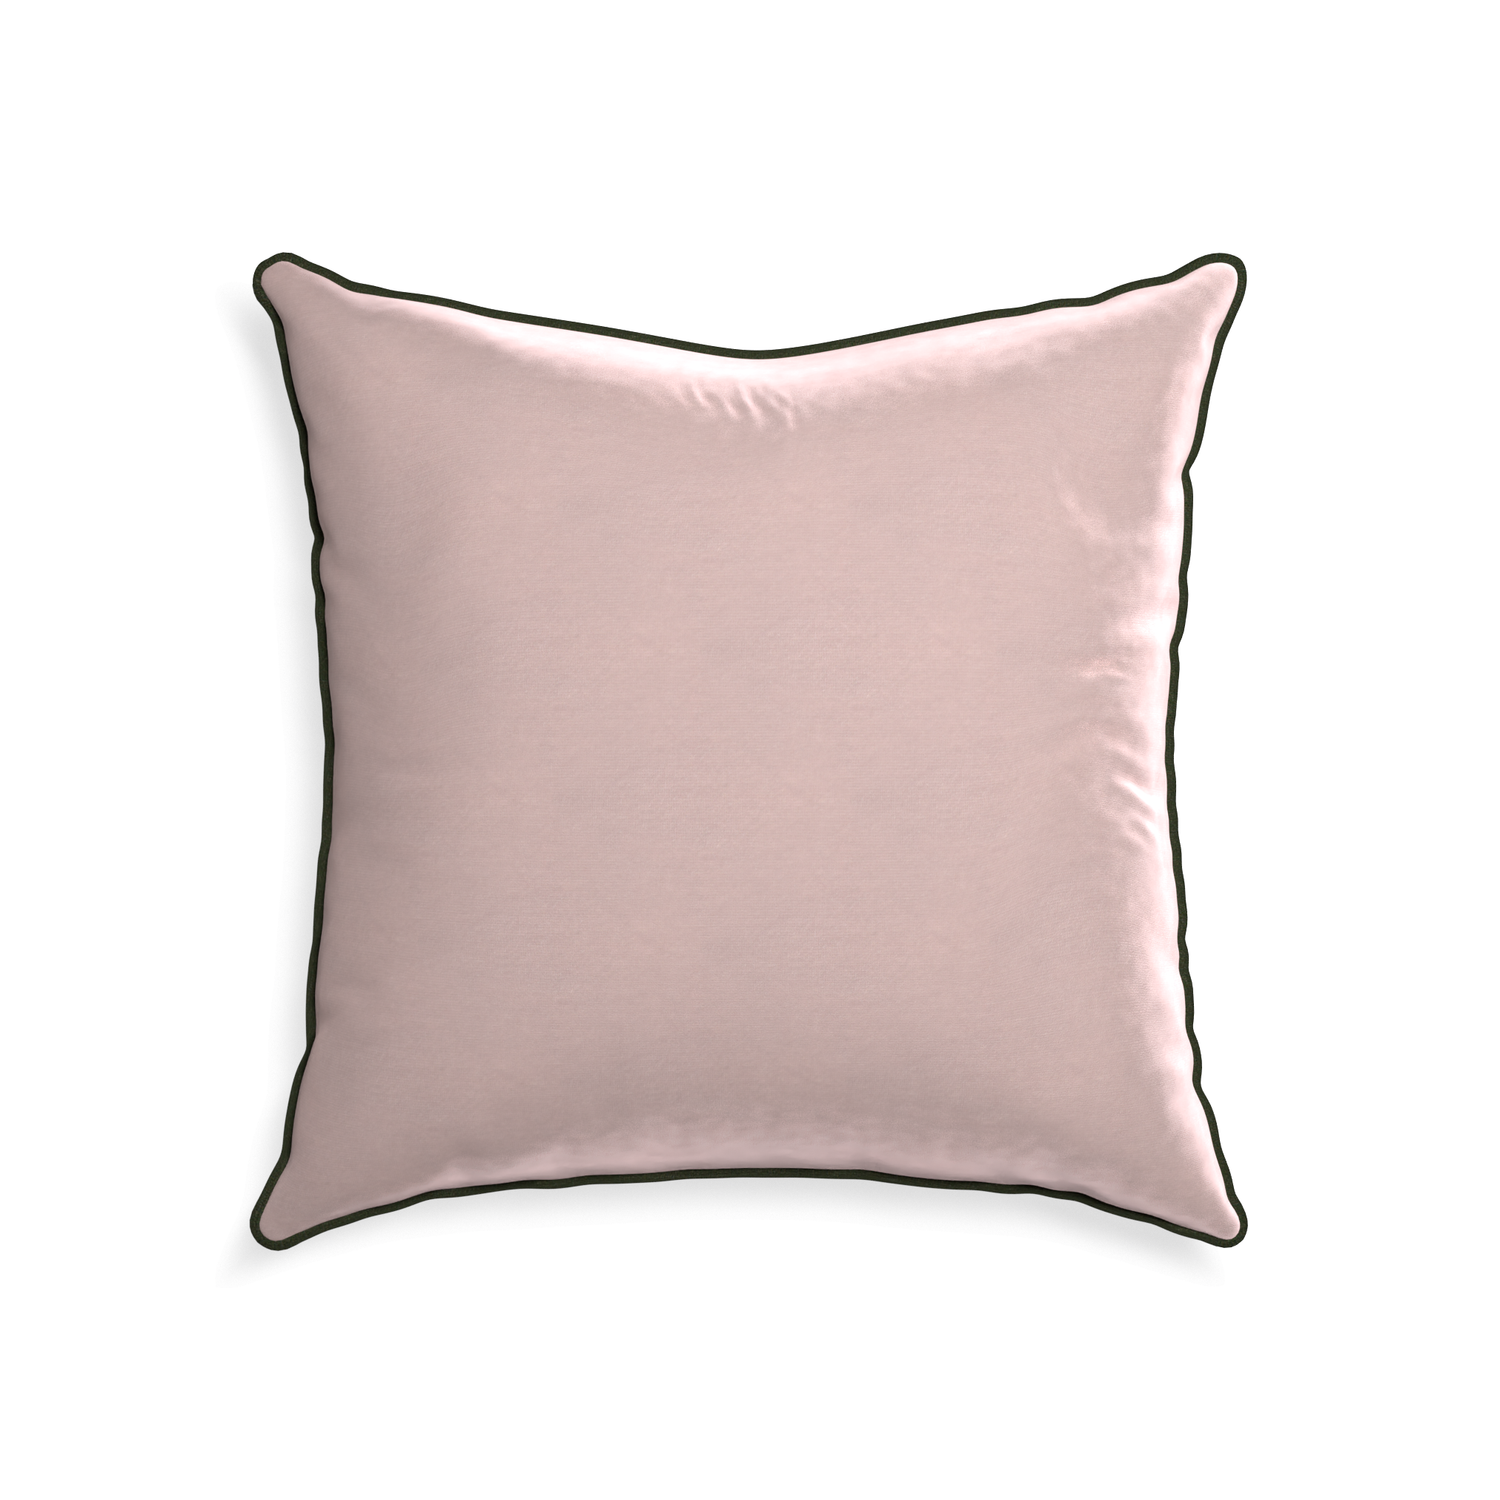 square light pink velvet pillow with fern green piping